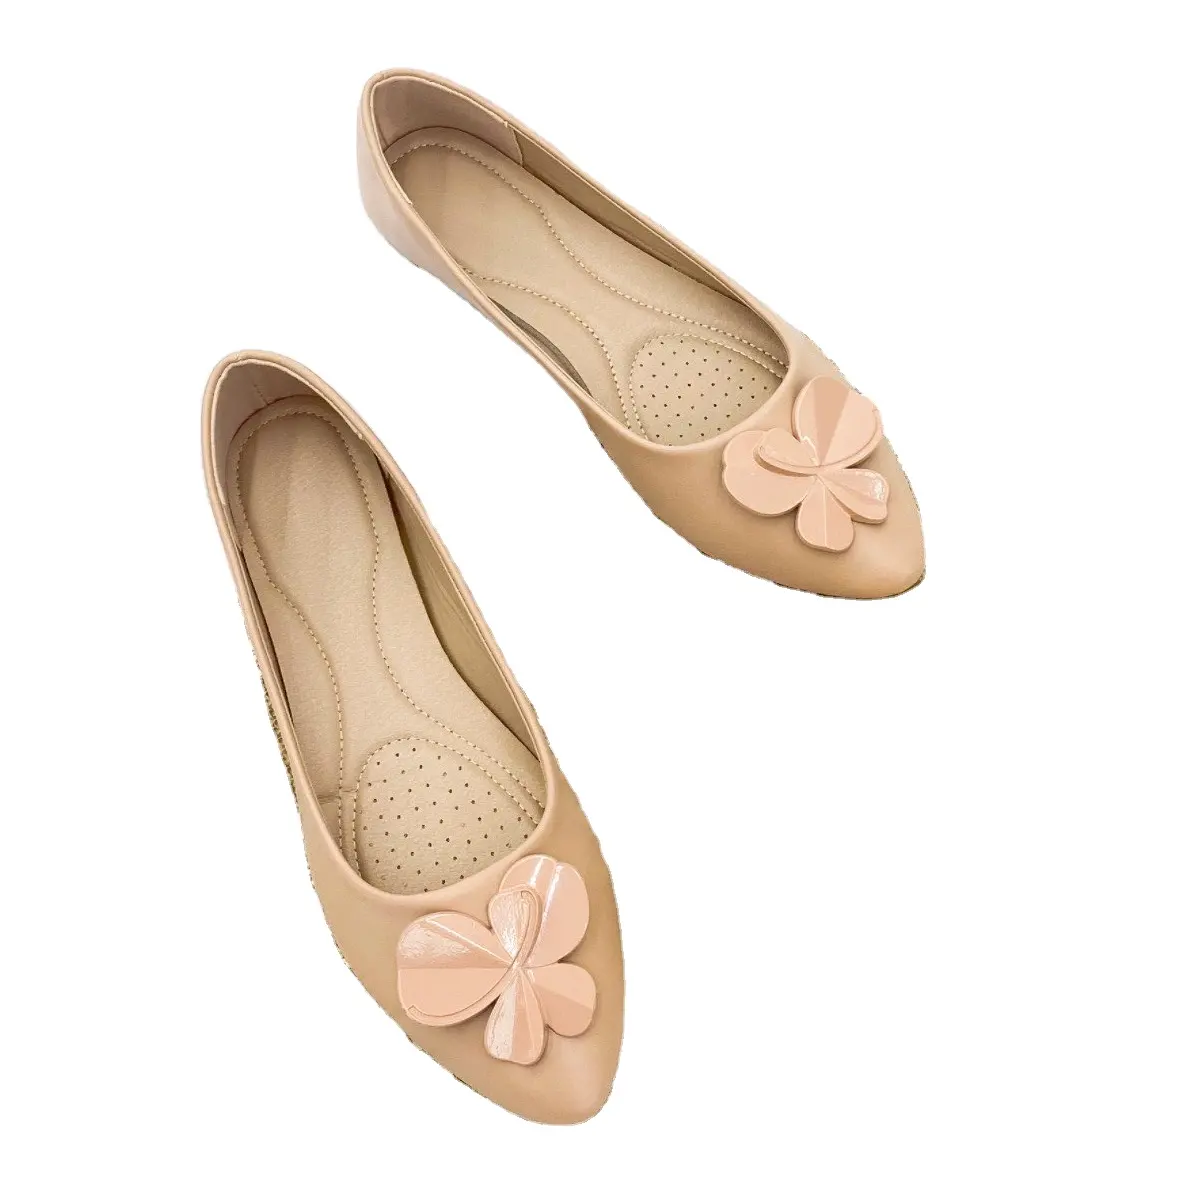 Comfortable and Chic Classic Women's Ballet Flats For Effortless Glamour Effortlessly Sophisticated Trendy Ladies' Ballet Flat